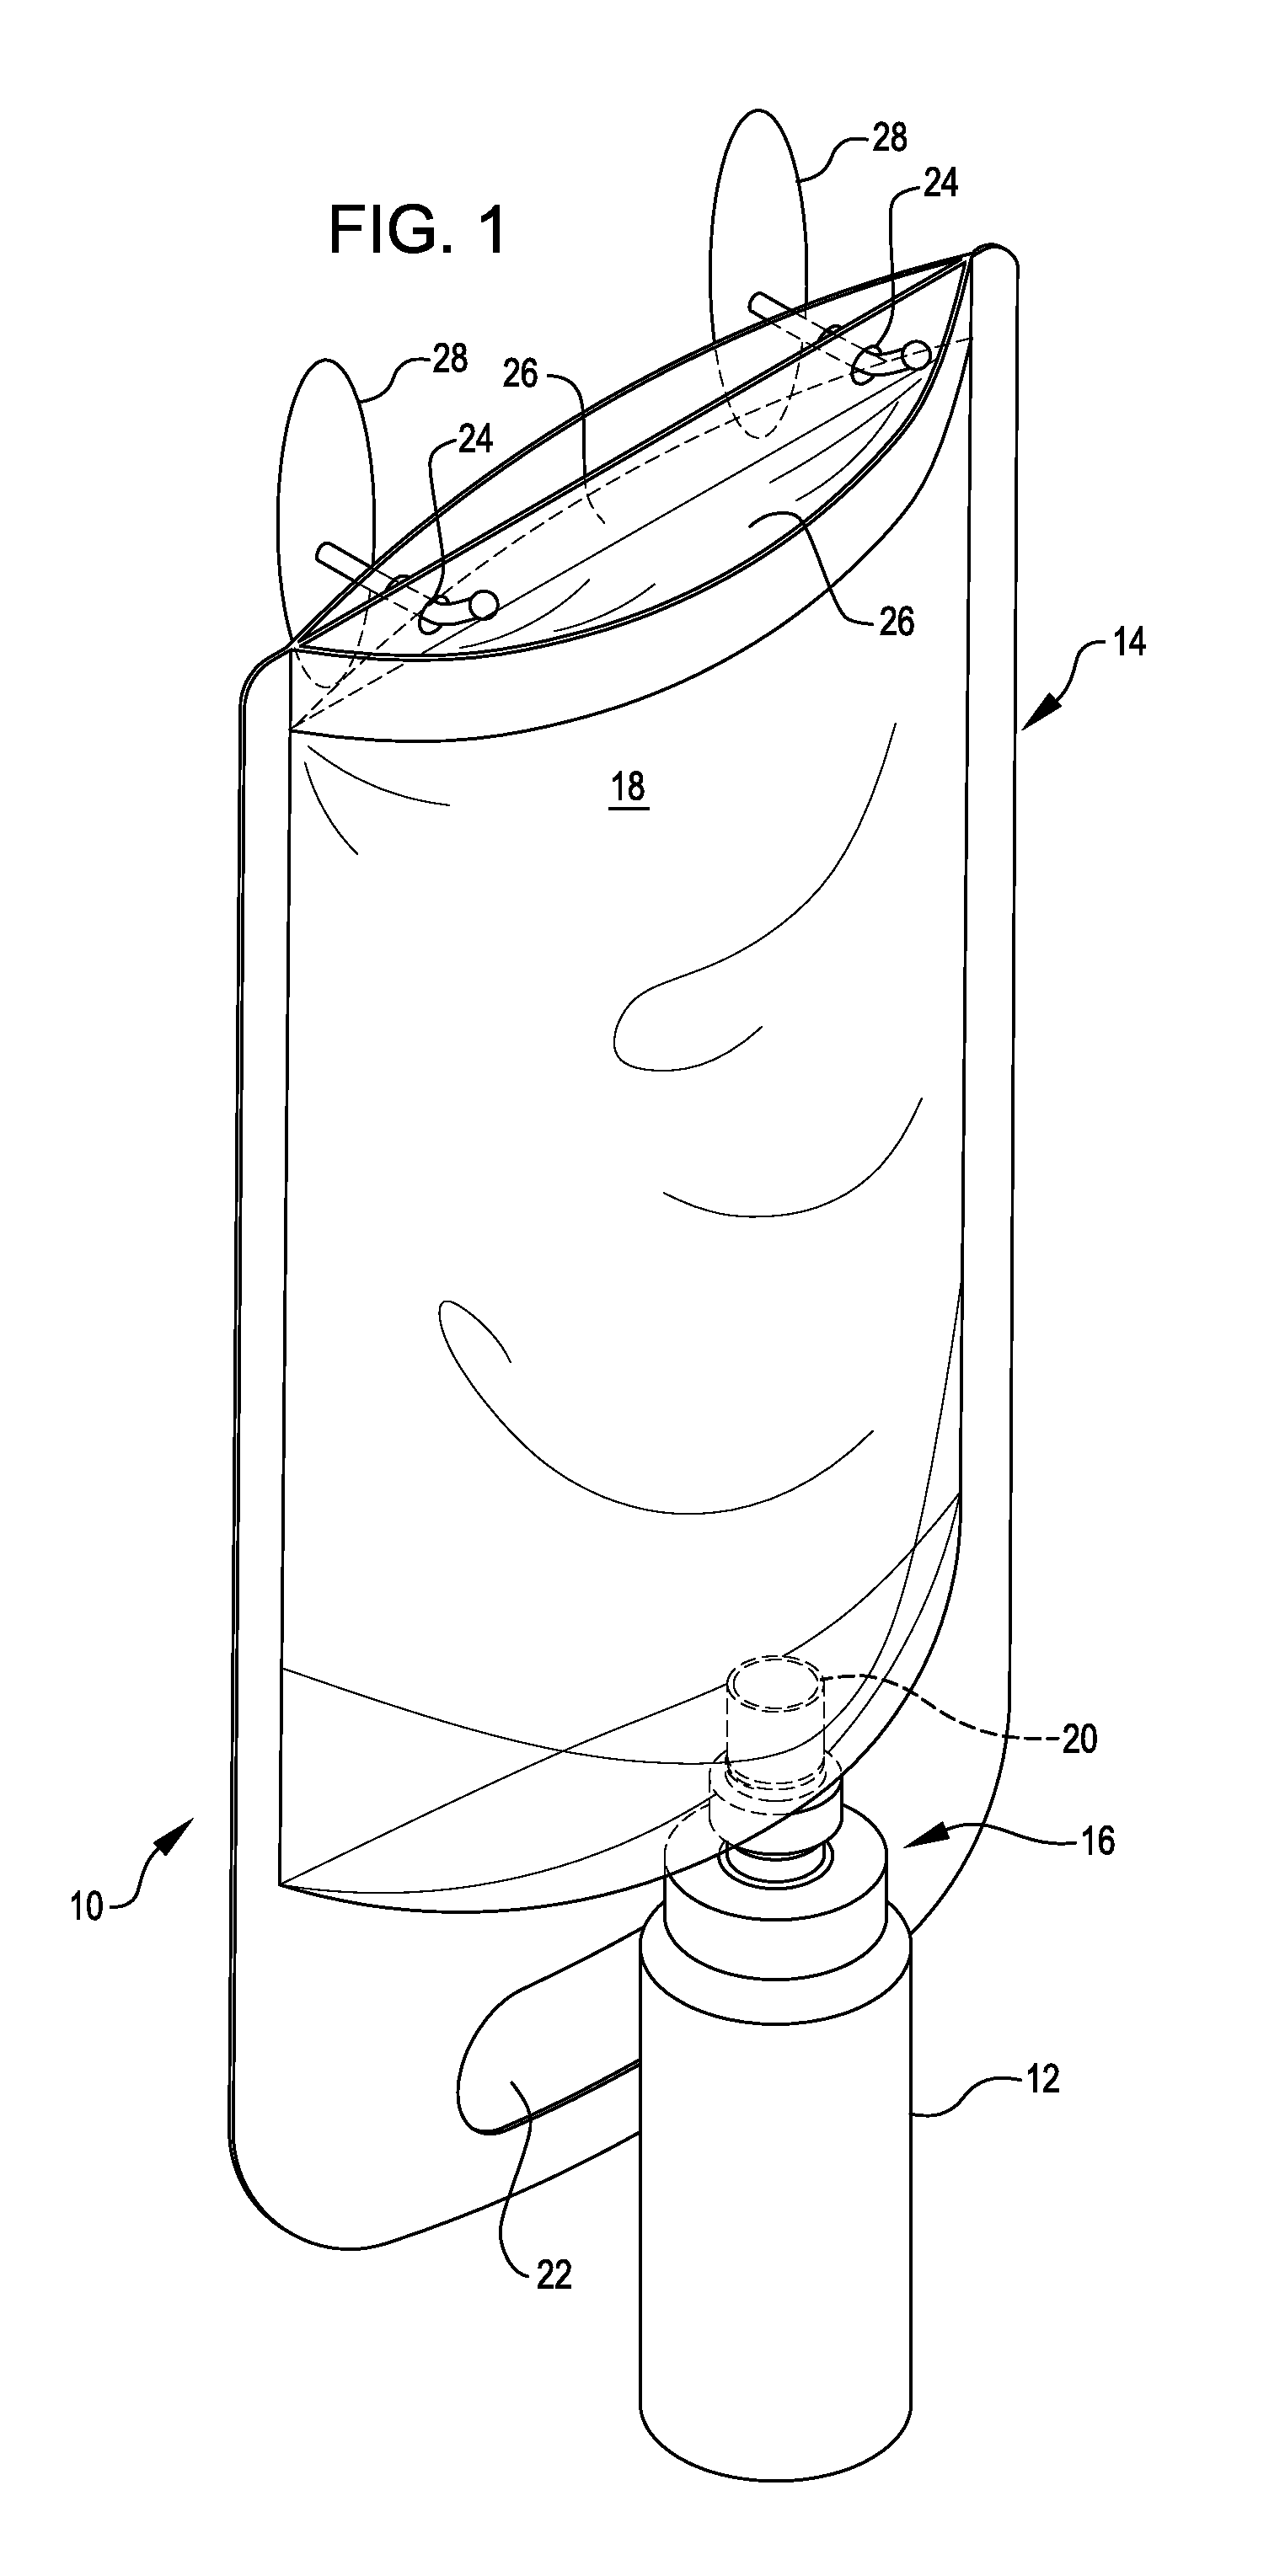 Adaptor for connecting a fluid package to a dispenser bottle